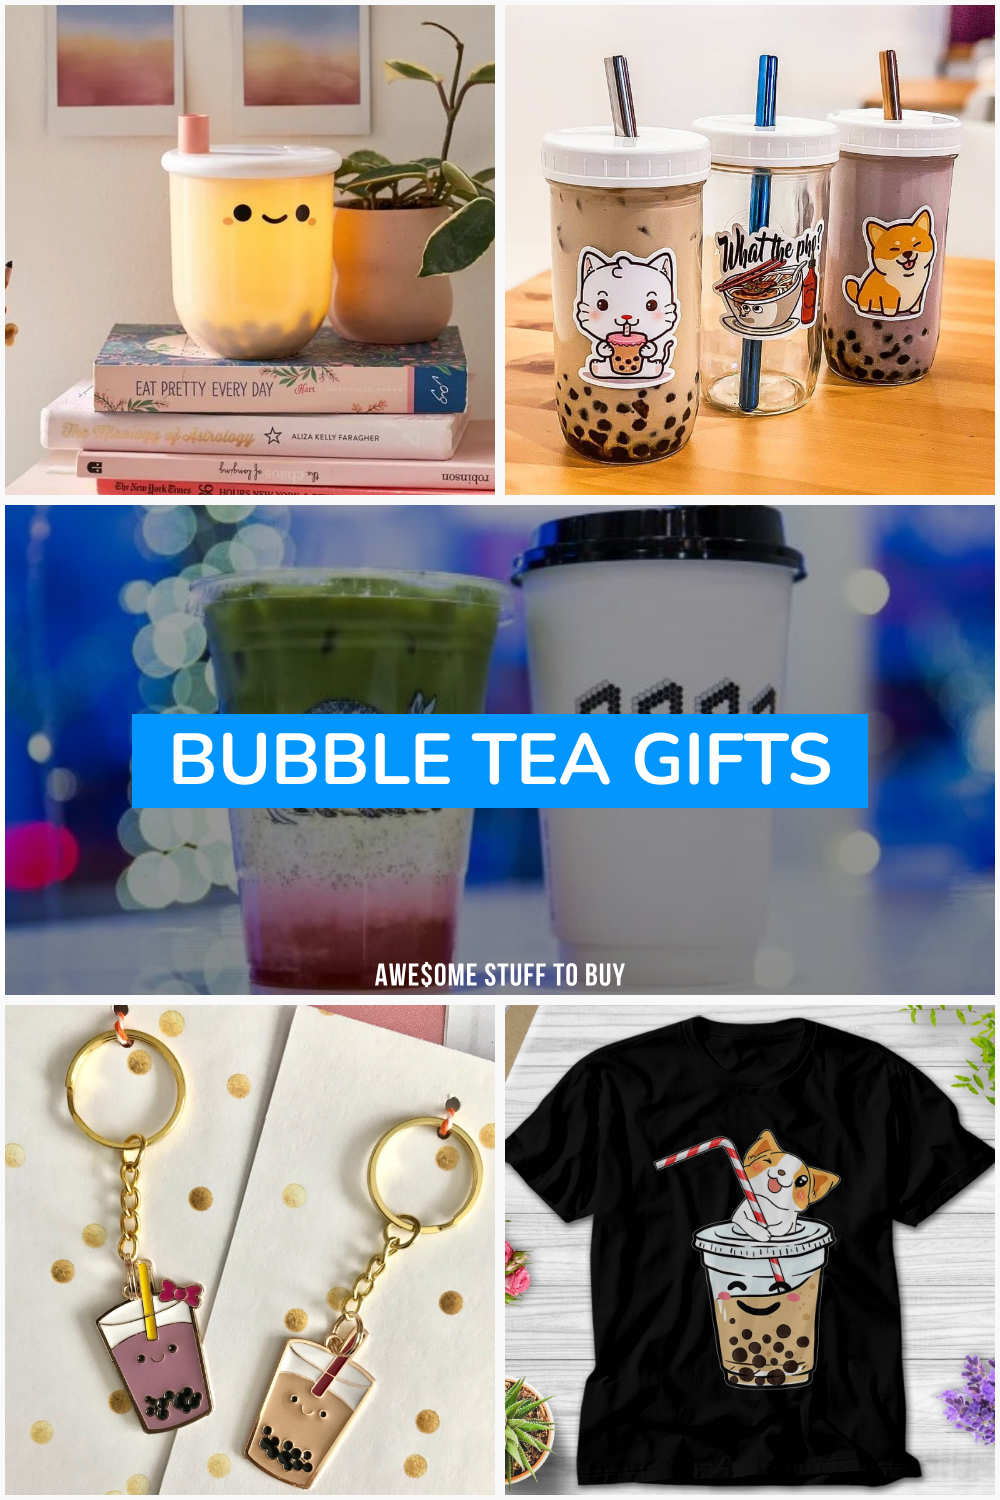 Bubble Tea Gifts // Awesome Stuff to Buy